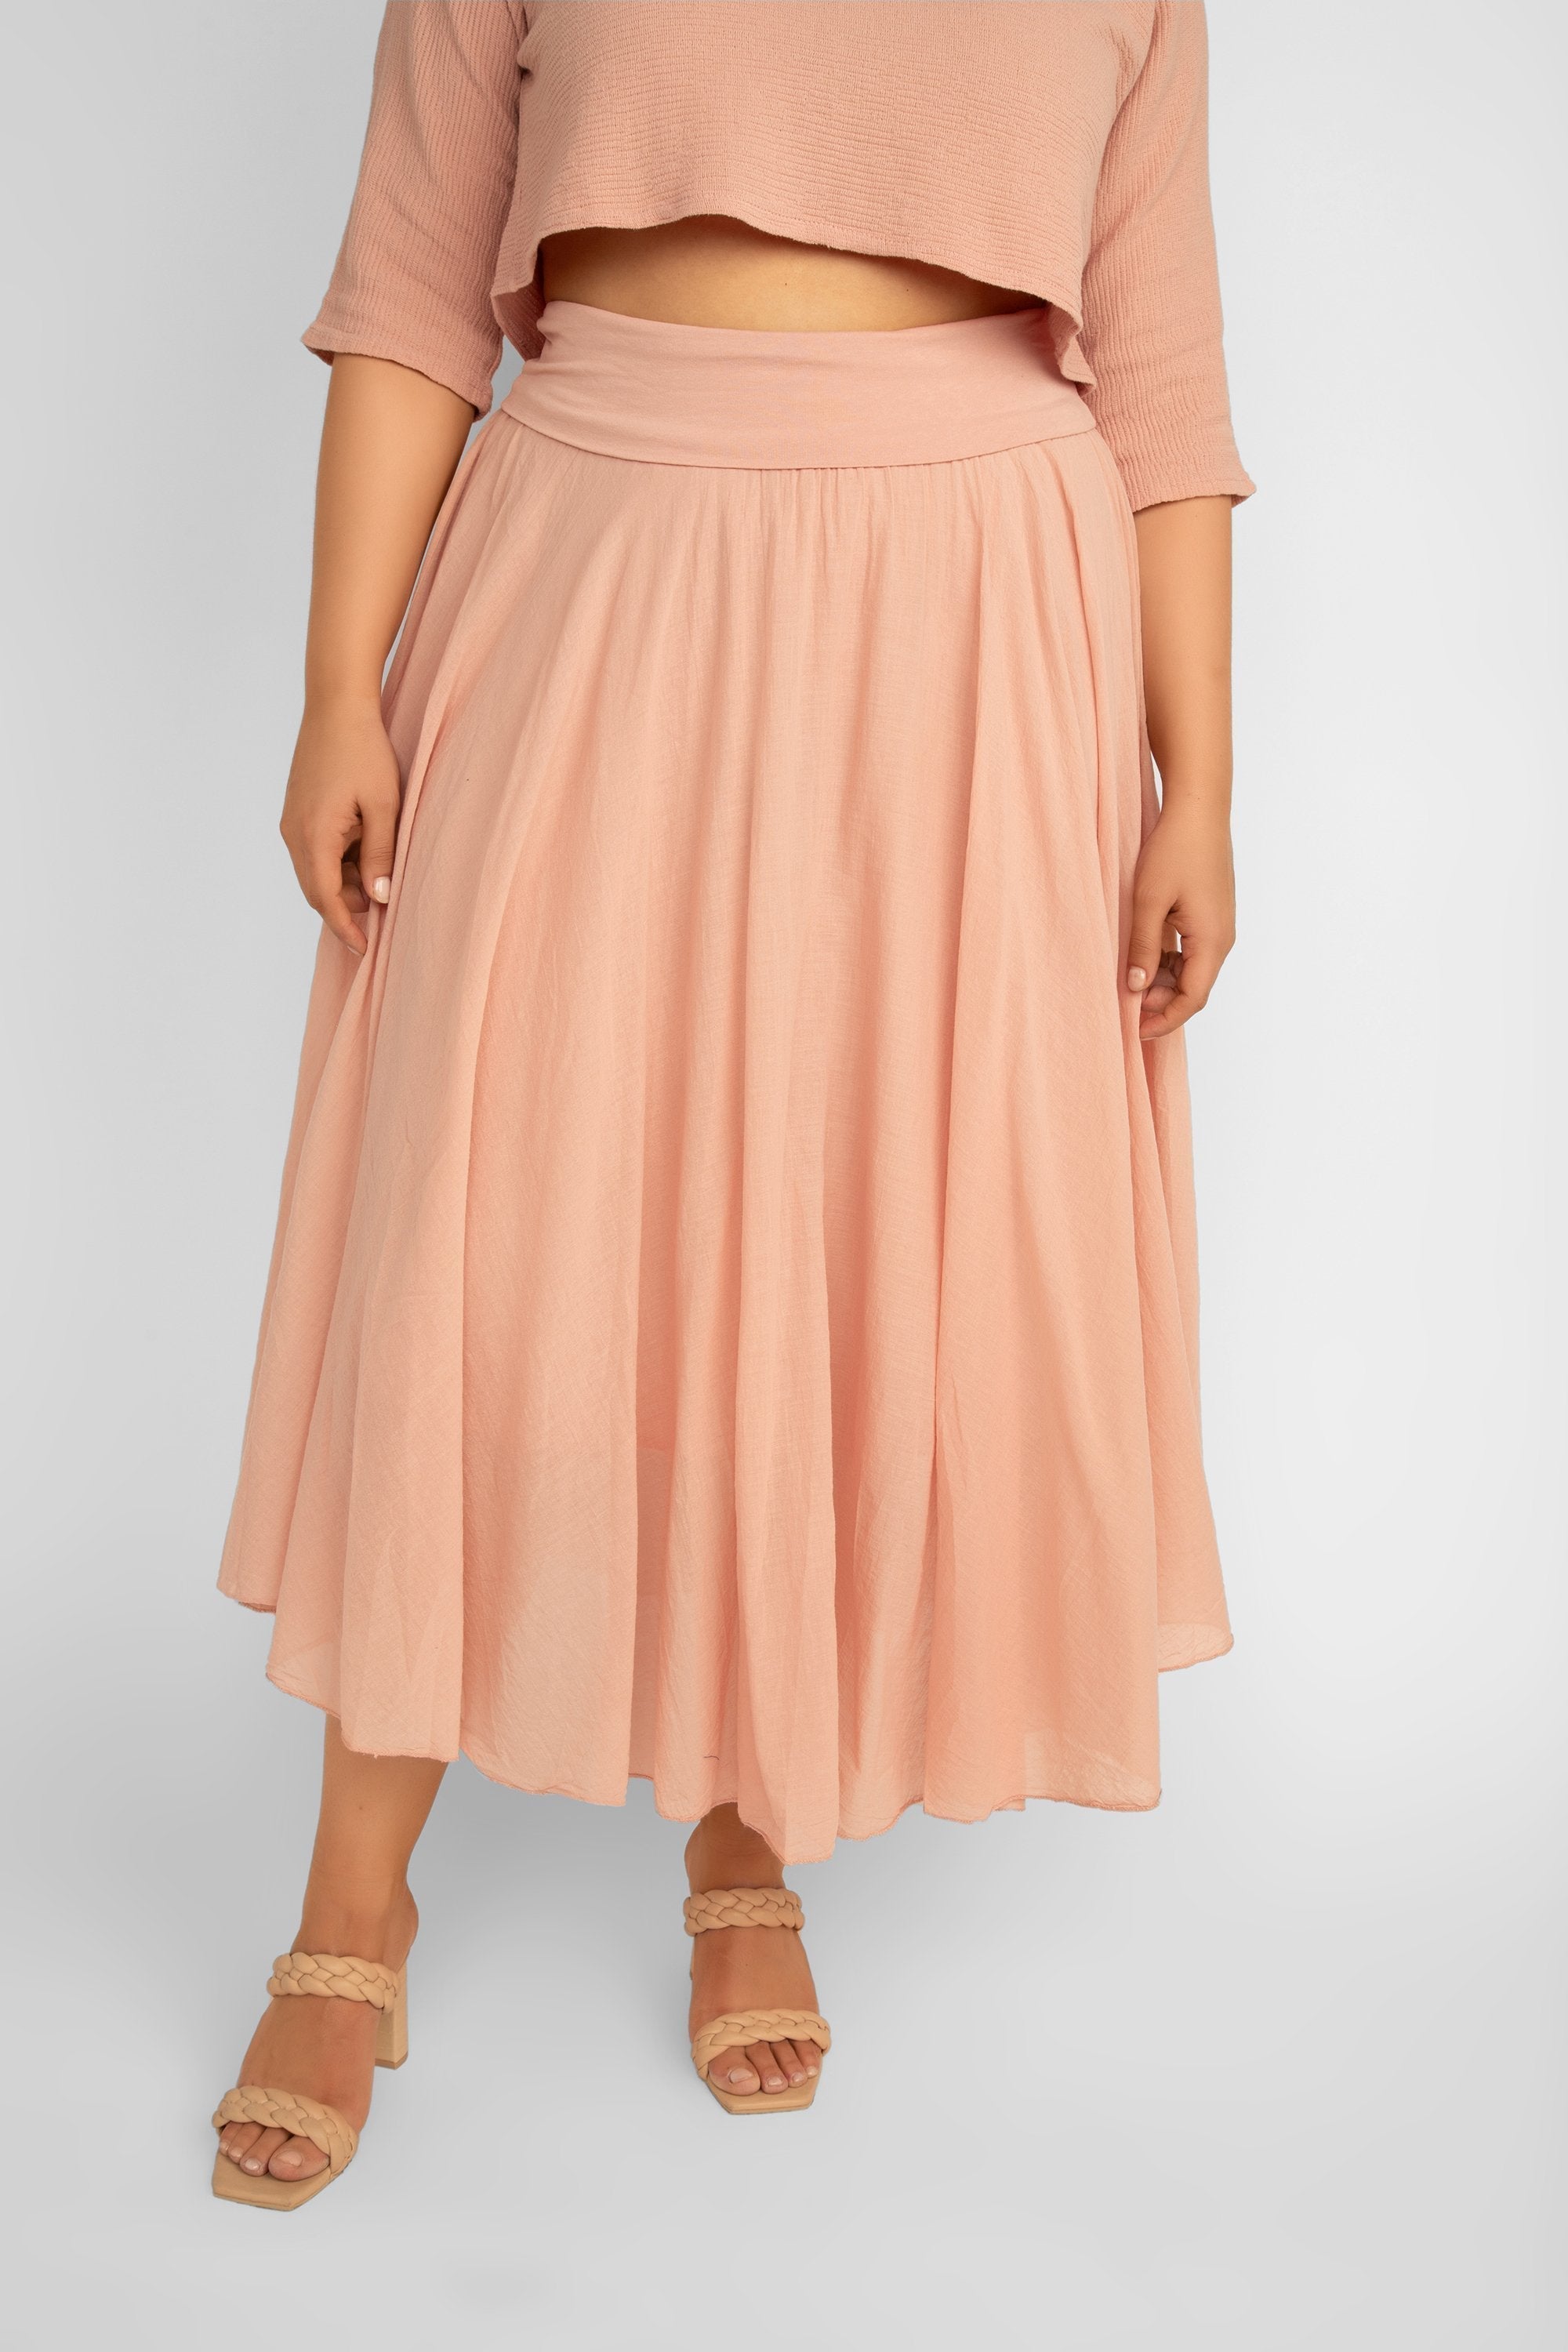 Front view of Me & Gee (L-6759) Flowy Cotton Maxi Skirt in Rose Pink